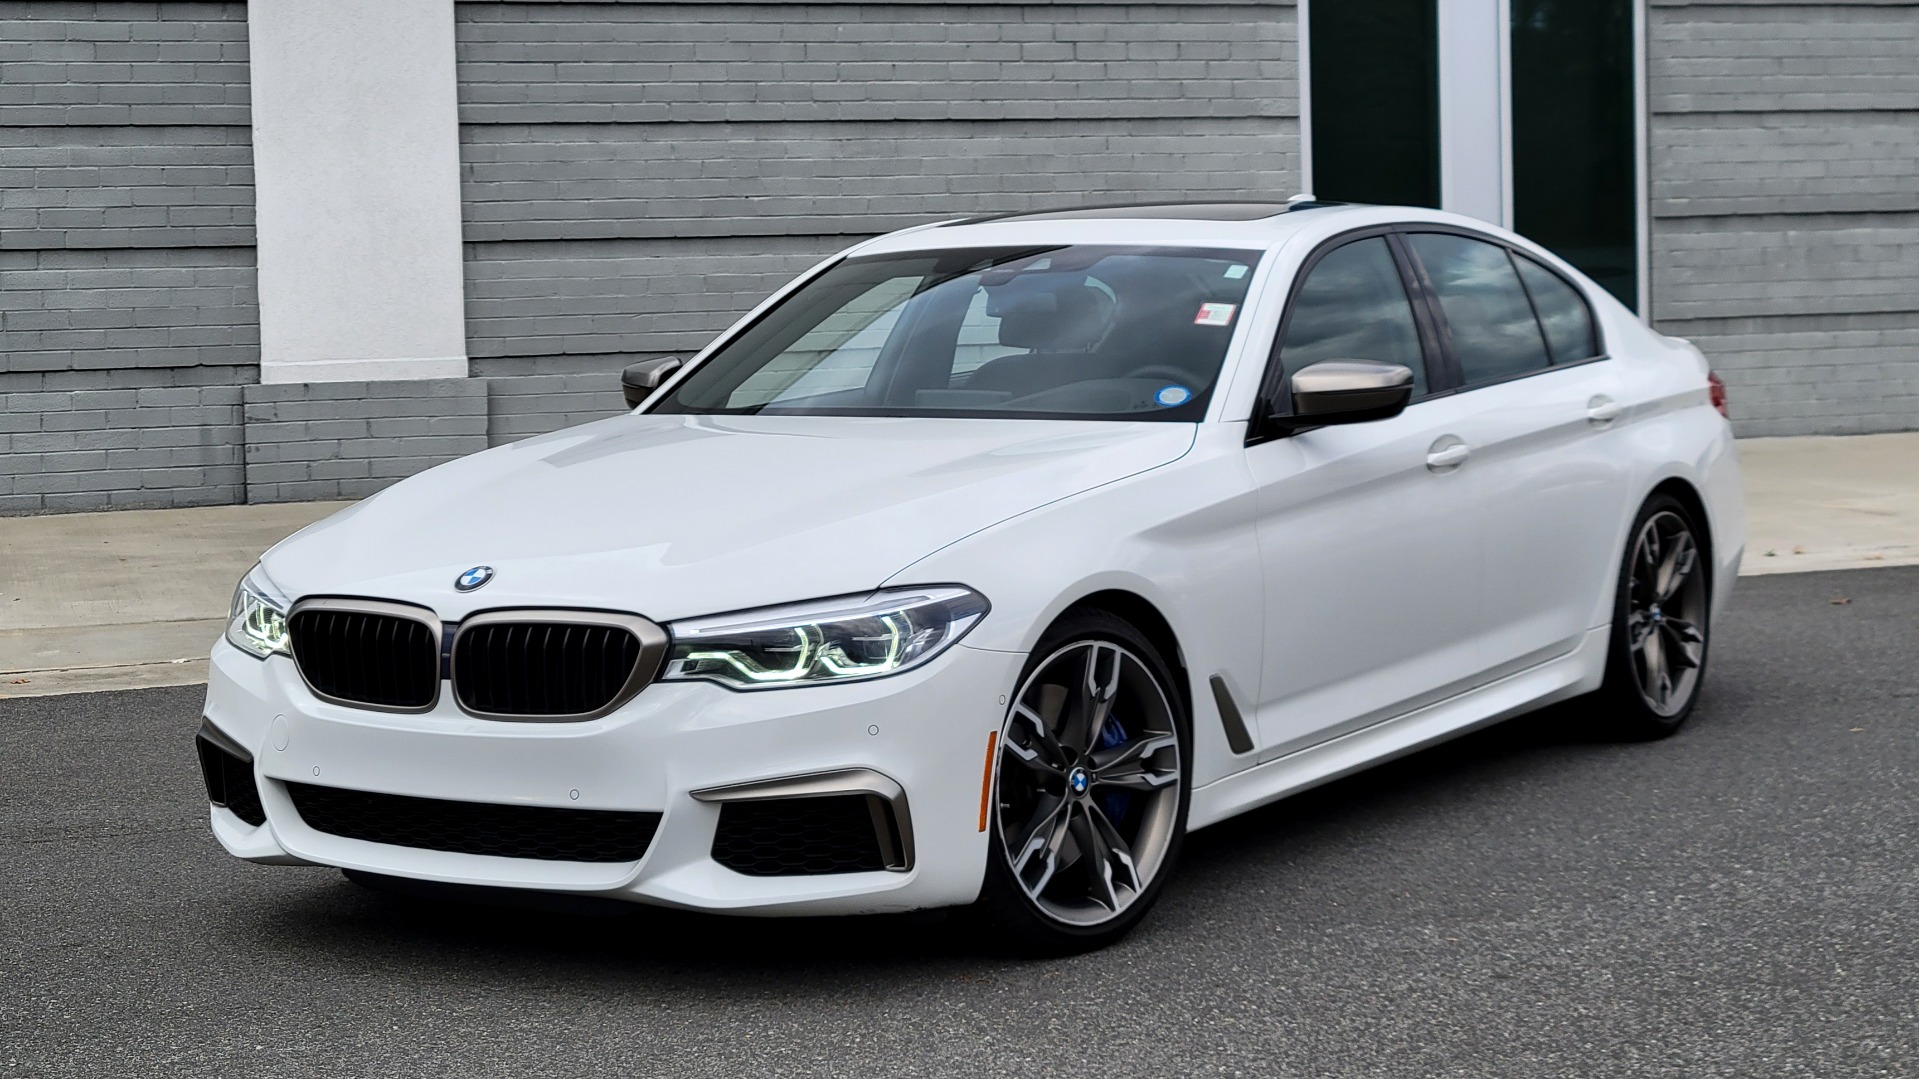 Used 2019 BMW 5 SERIES M550I XDRIVE PREMIUM / DYN HANDLING / EXECUTIVE / HUD / HTD STS / REARVIEW for sale Sold at Formula Imports in Charlotte NC 28227 2